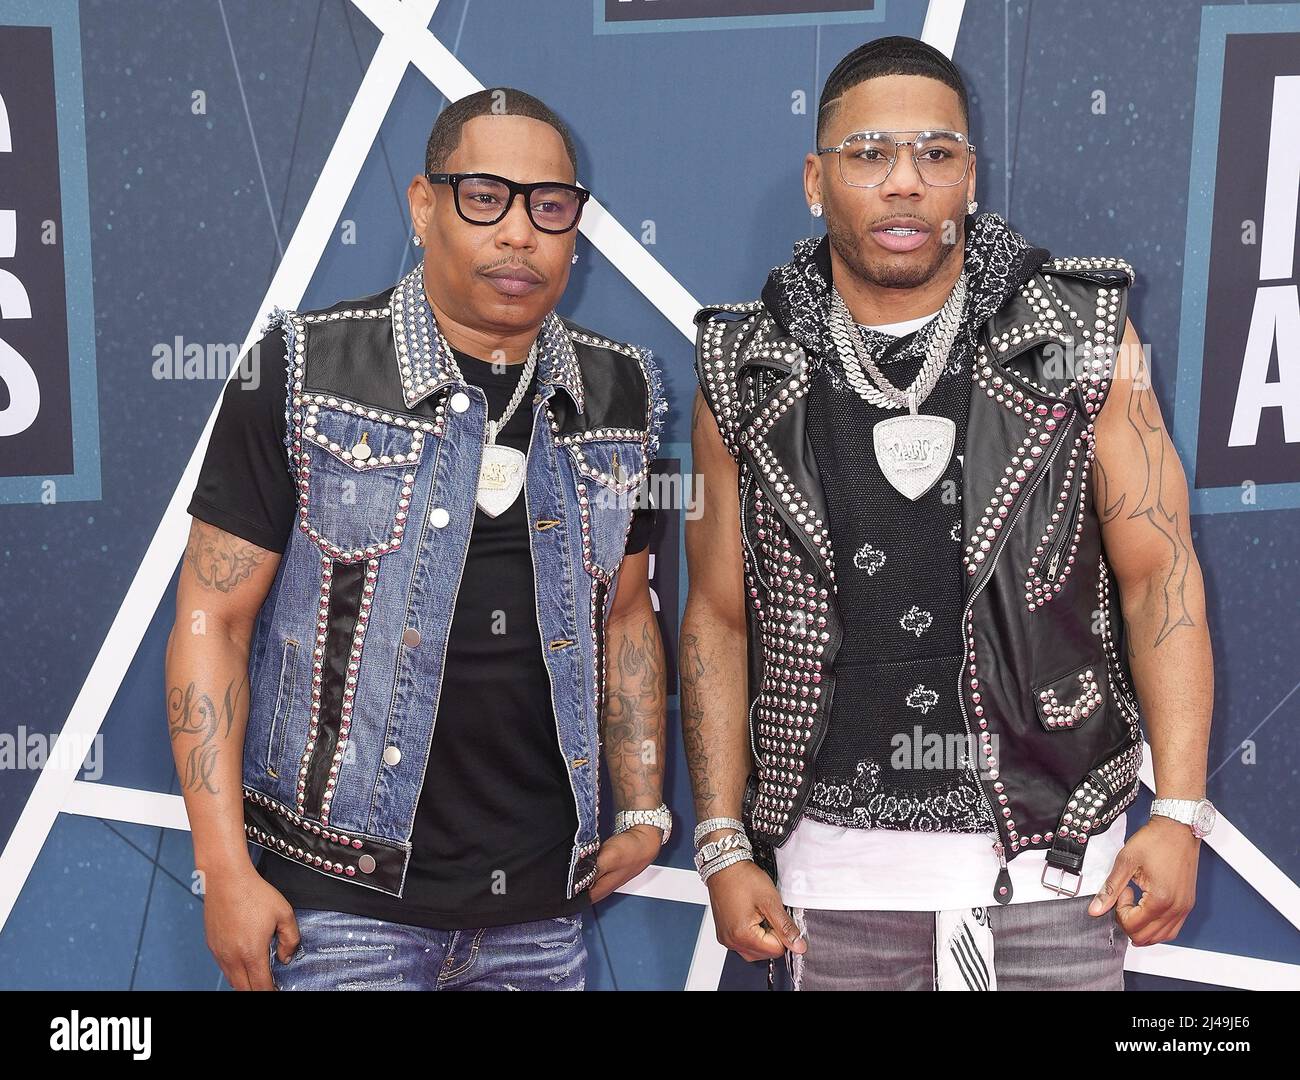 City Spud, Nelly attends the 2022 CMT Music Awards at Nashville